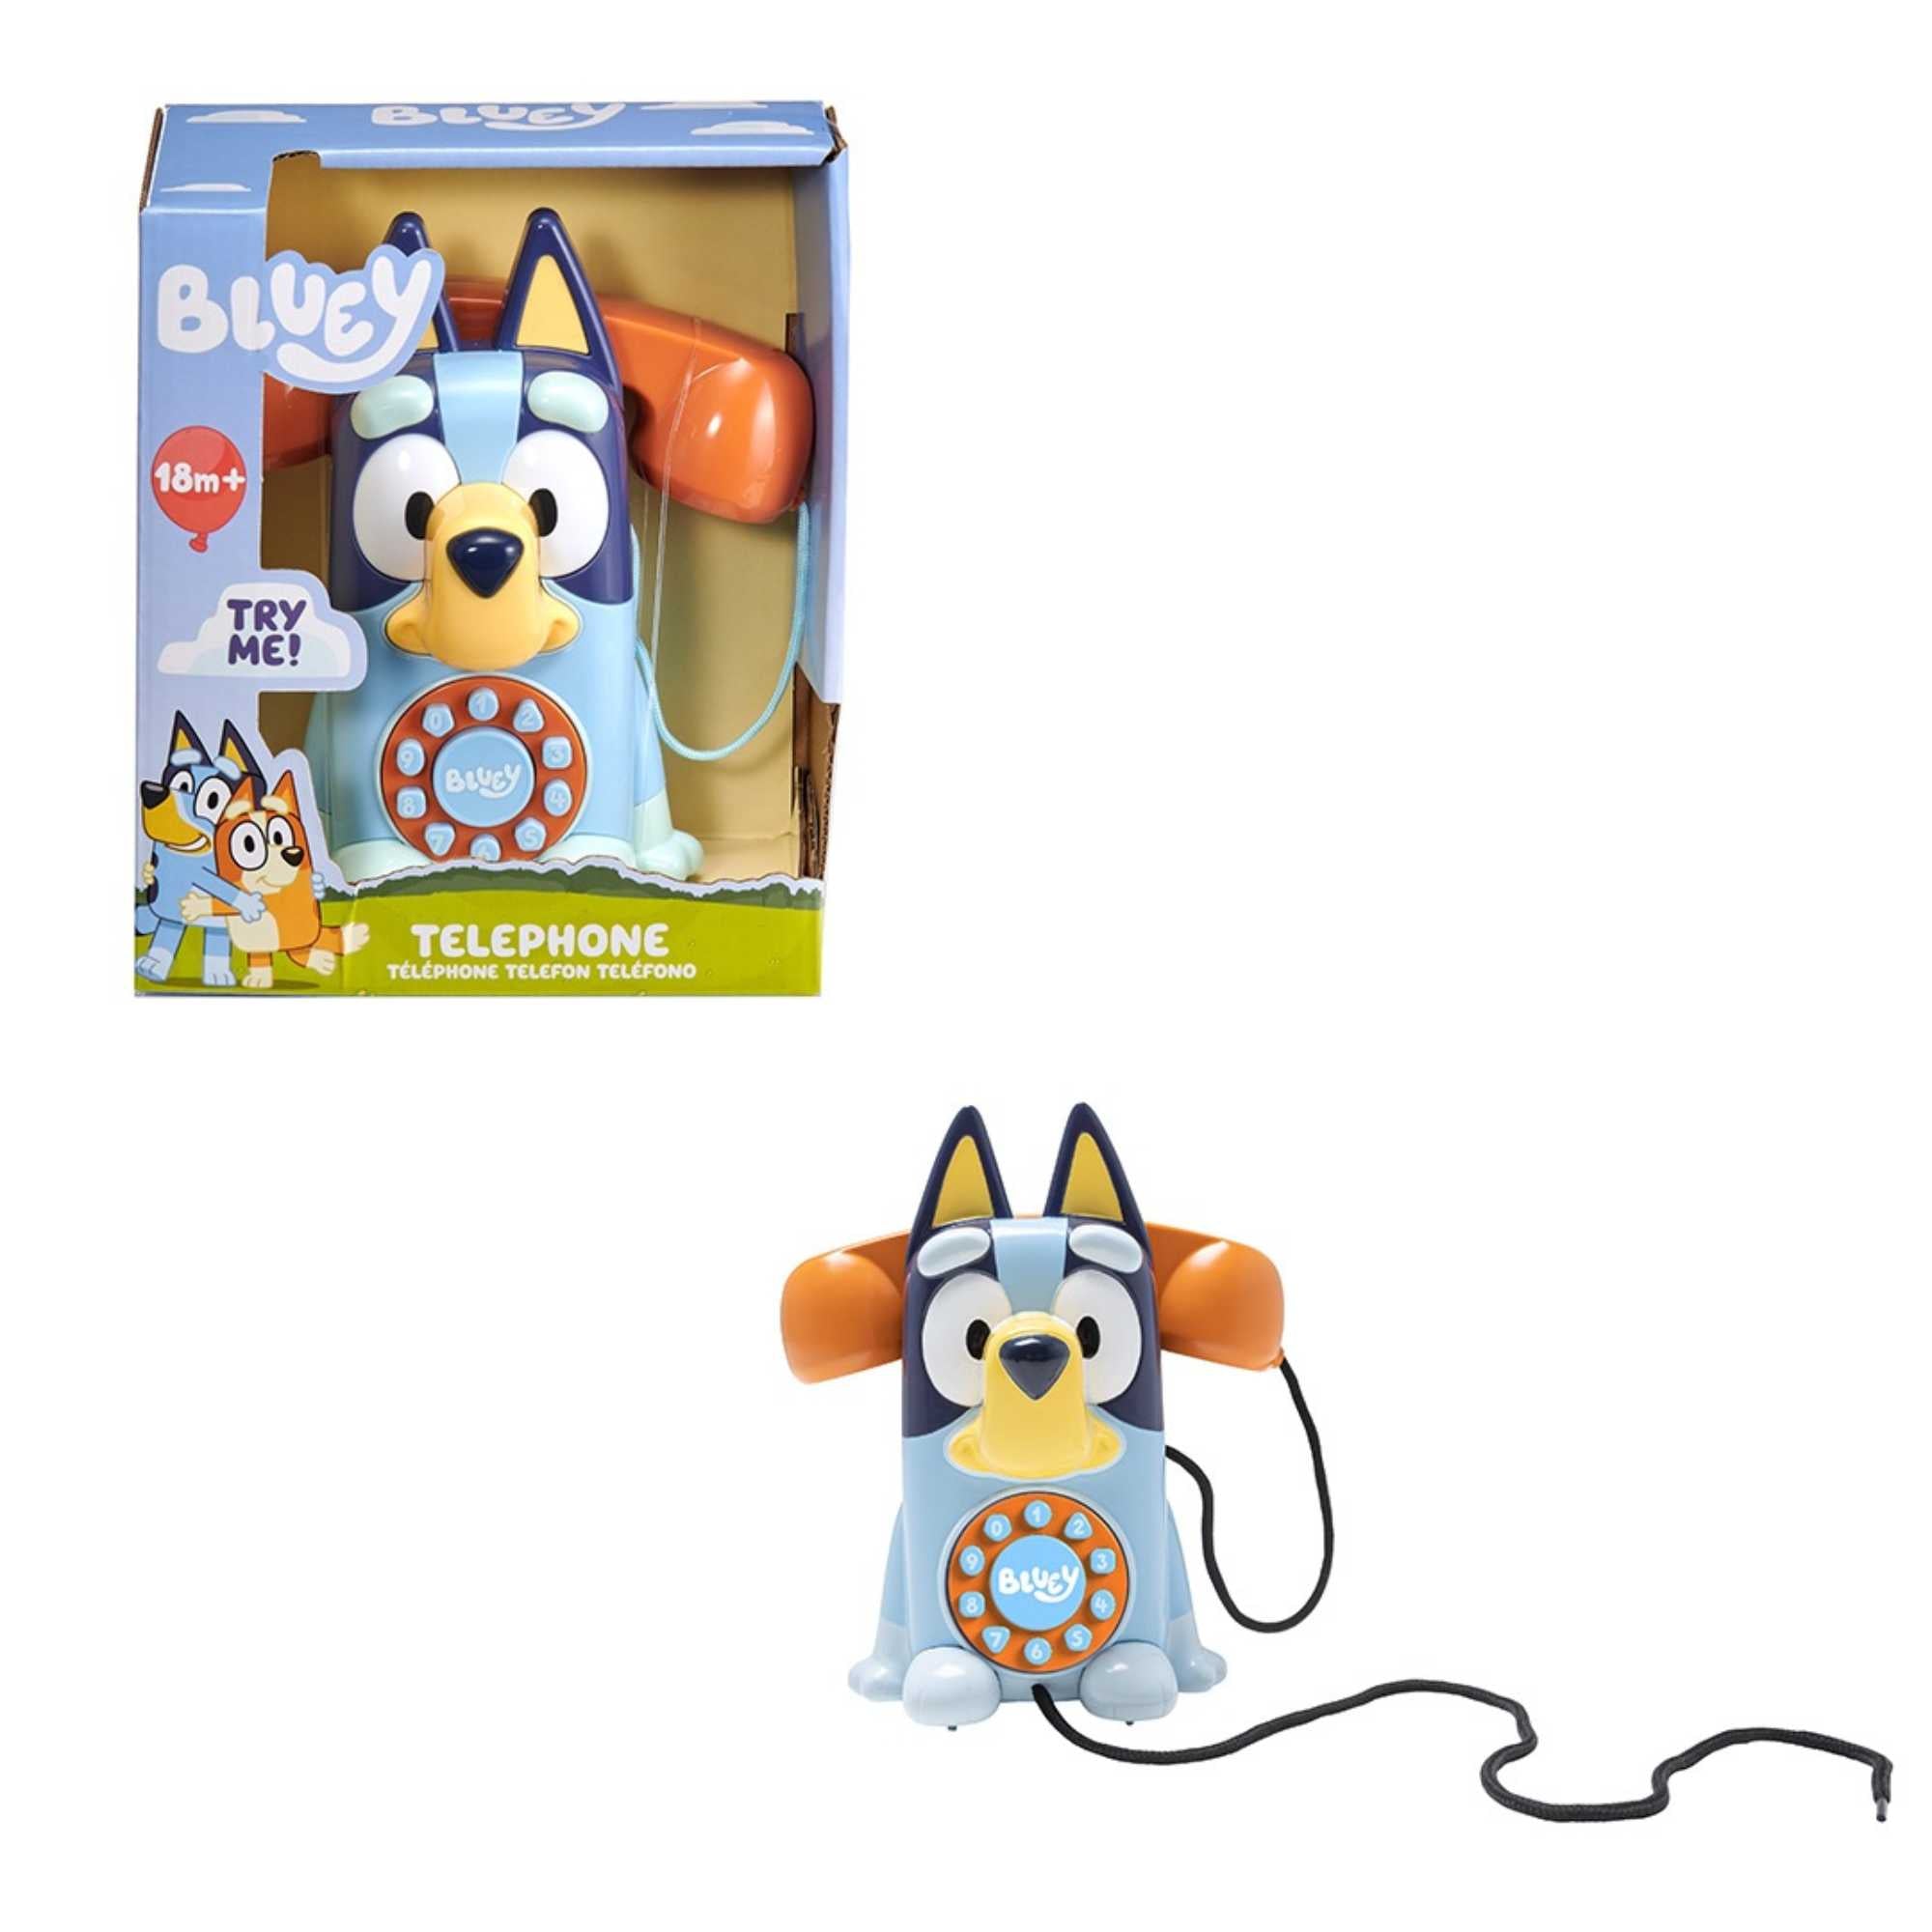 Bluey Interactive Telephone from Wowow Toys